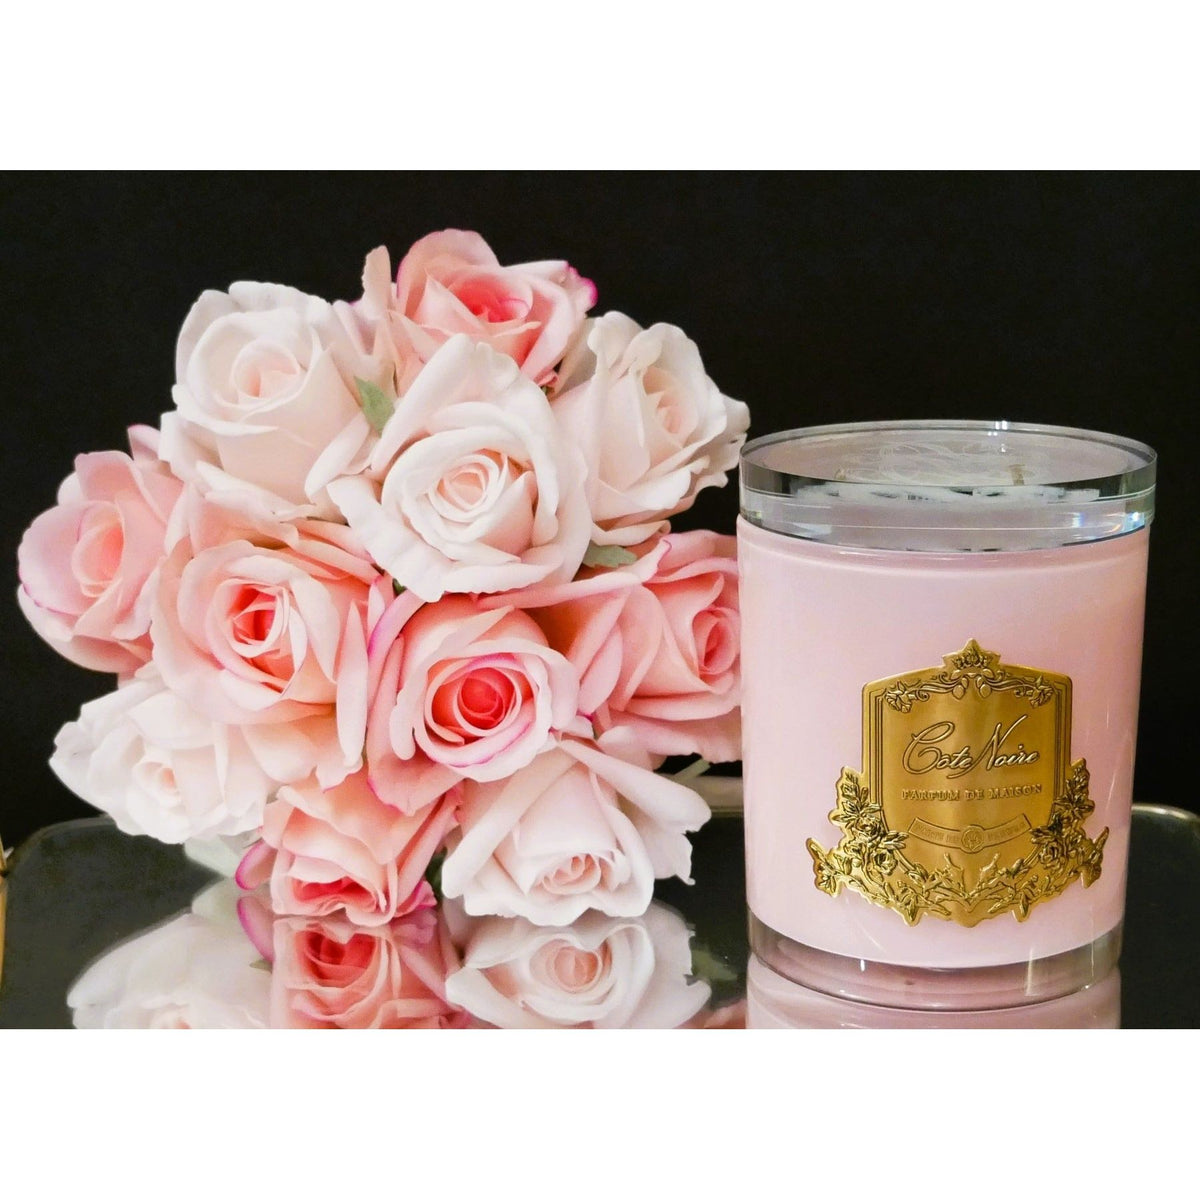 COTE NOIRE | PINK CHAMPAGNE - PINK VESSEL - GOLD BADGE - LIMITED EDITION